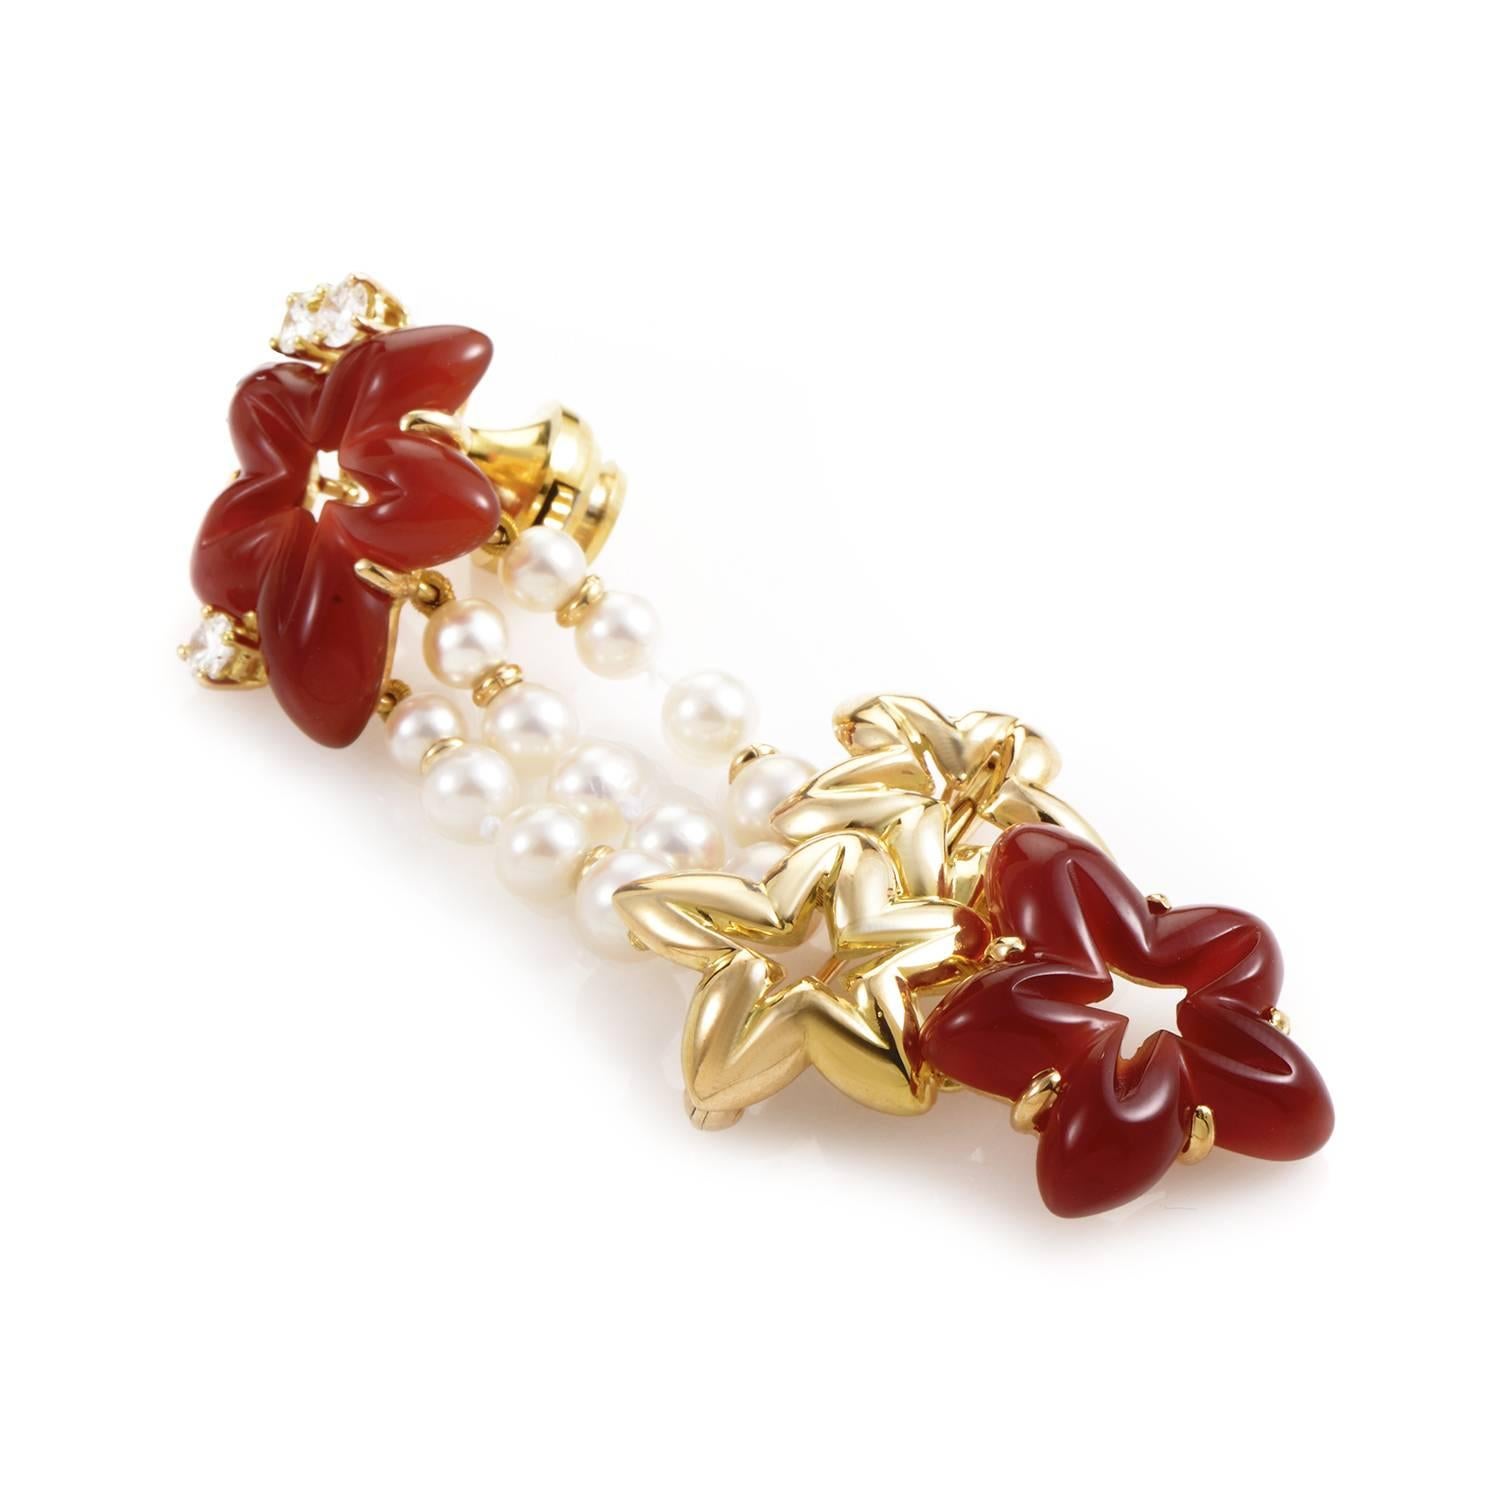 Vivid and exuberant in its tasteful selection of eye-catching colors, this majestic pin from Chaumet boasts lovely star-shaped decorations in 18K yellow gold and gorgeous brown jade, embellished also with ever-graceful pearls and glittering diamonds